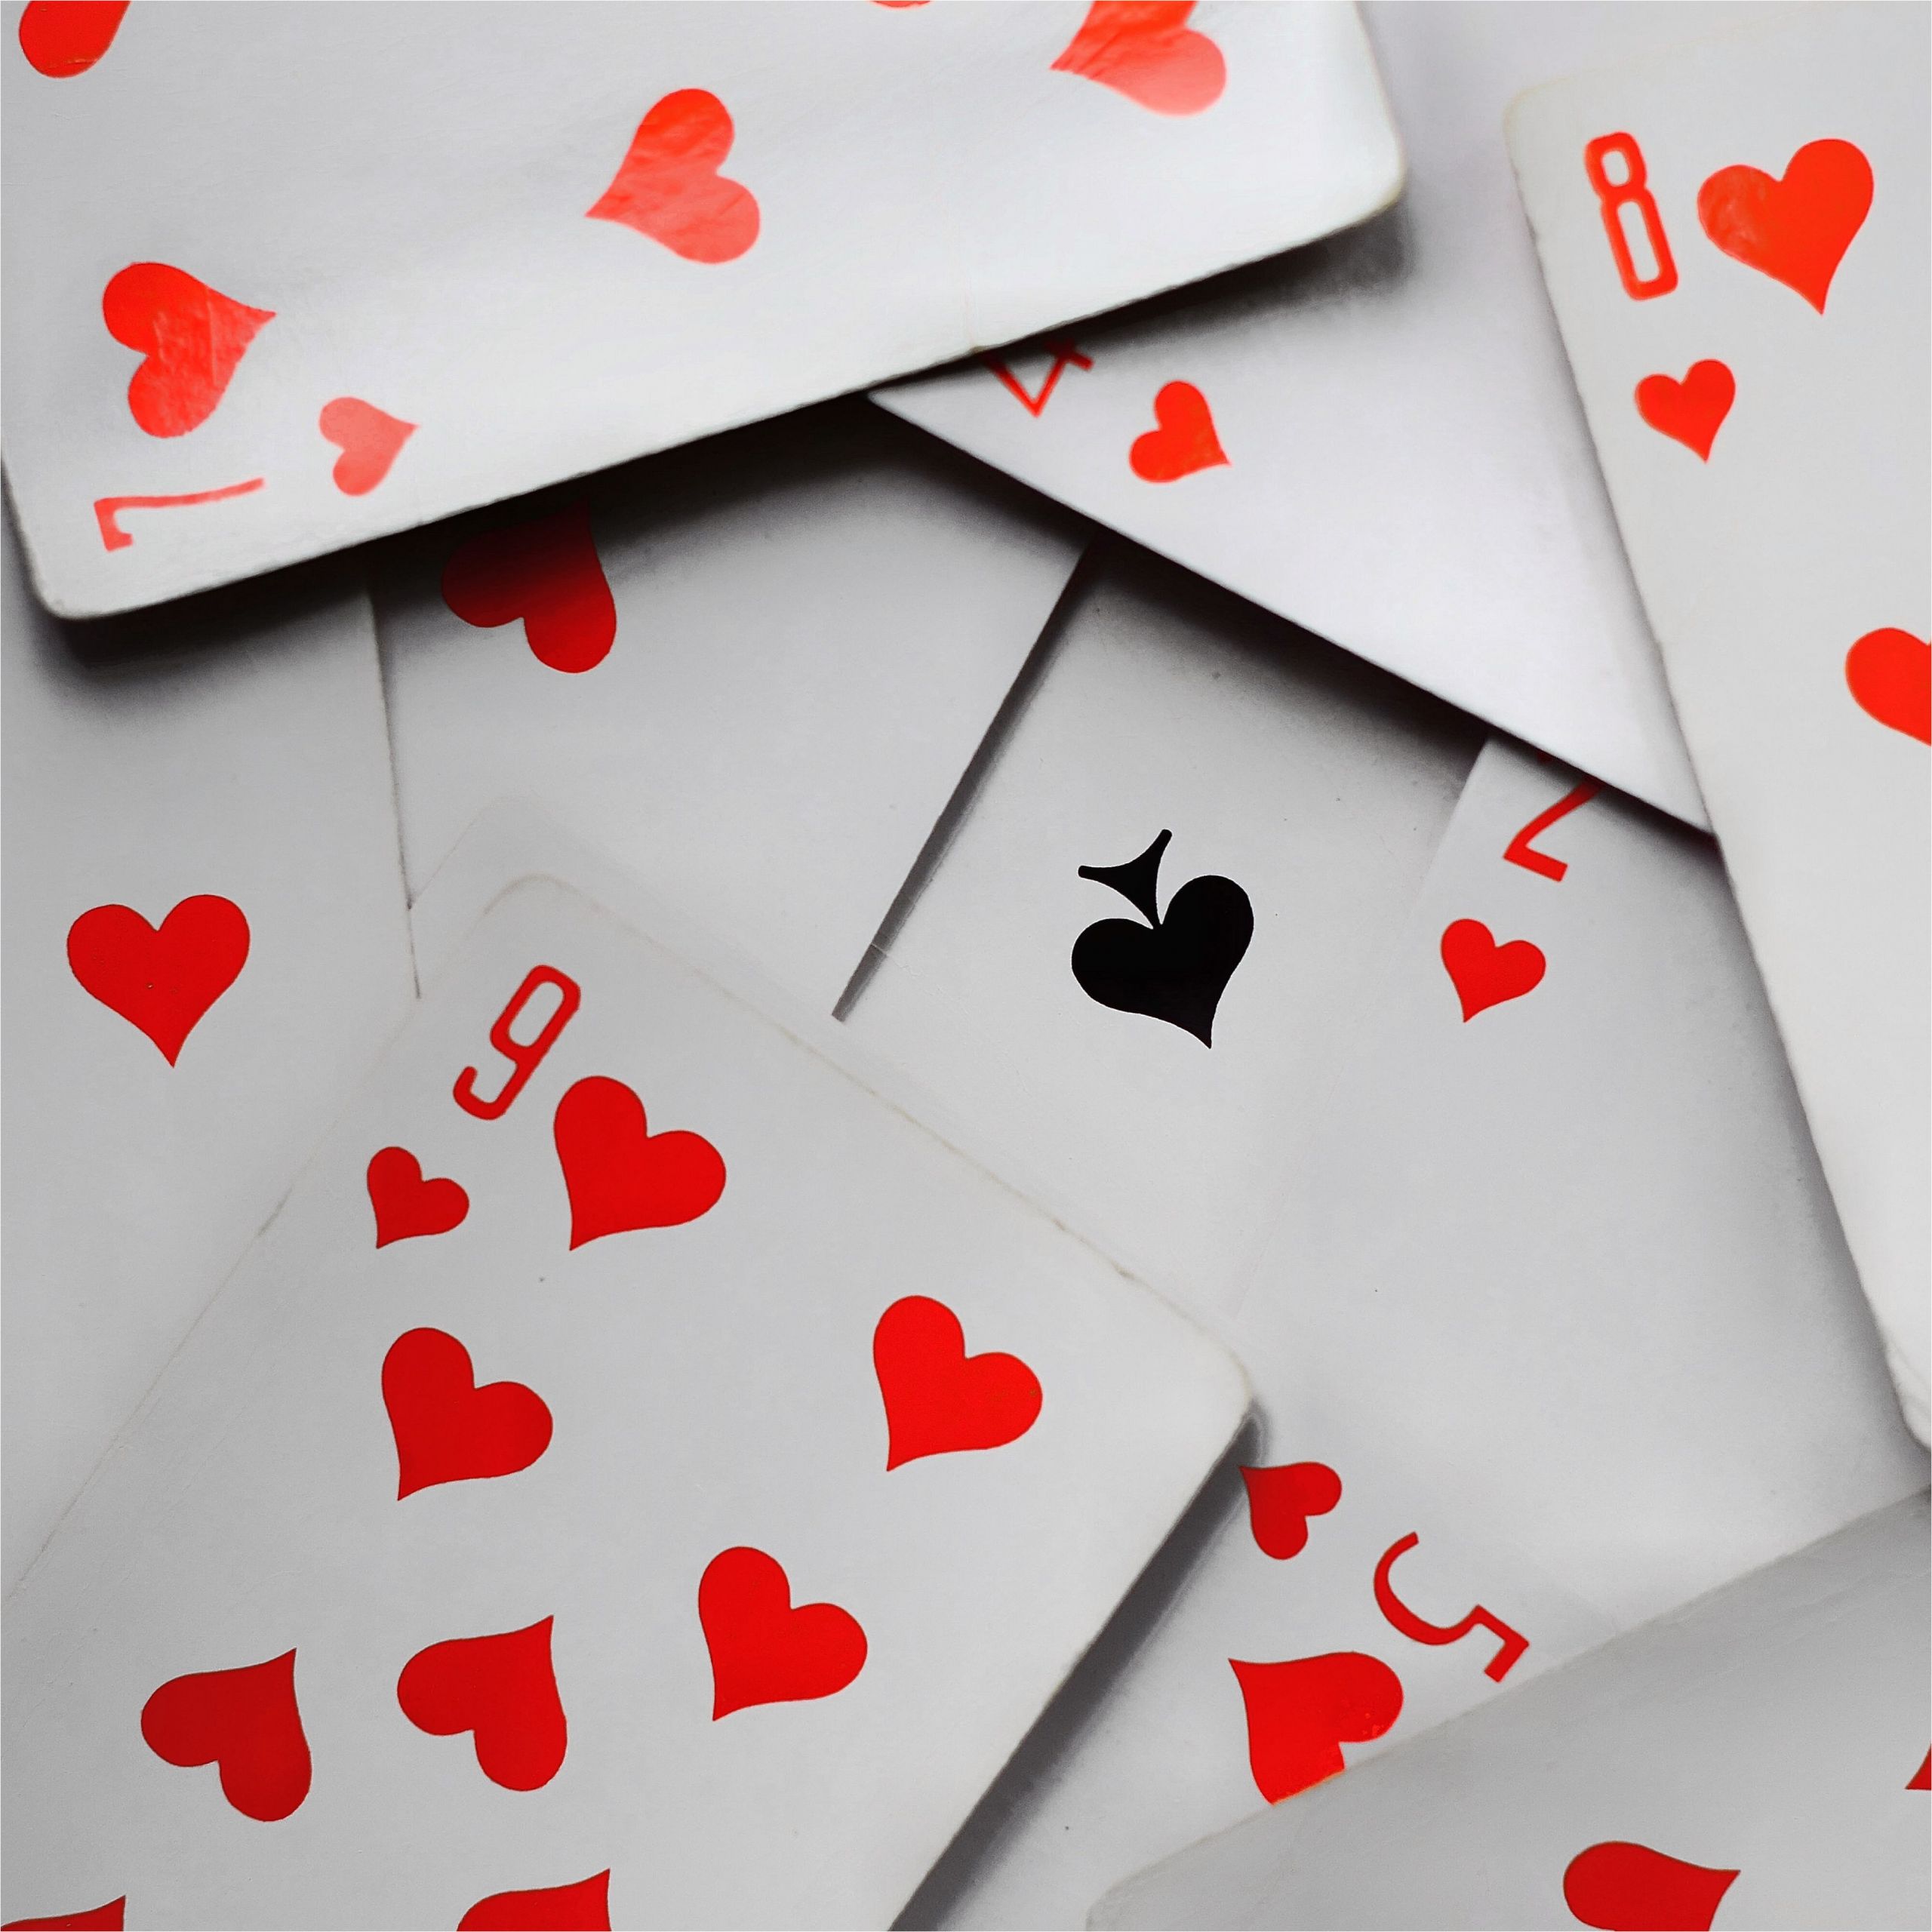 Simple King Of Hearts Card Hearts Card Game Strategy and Tips